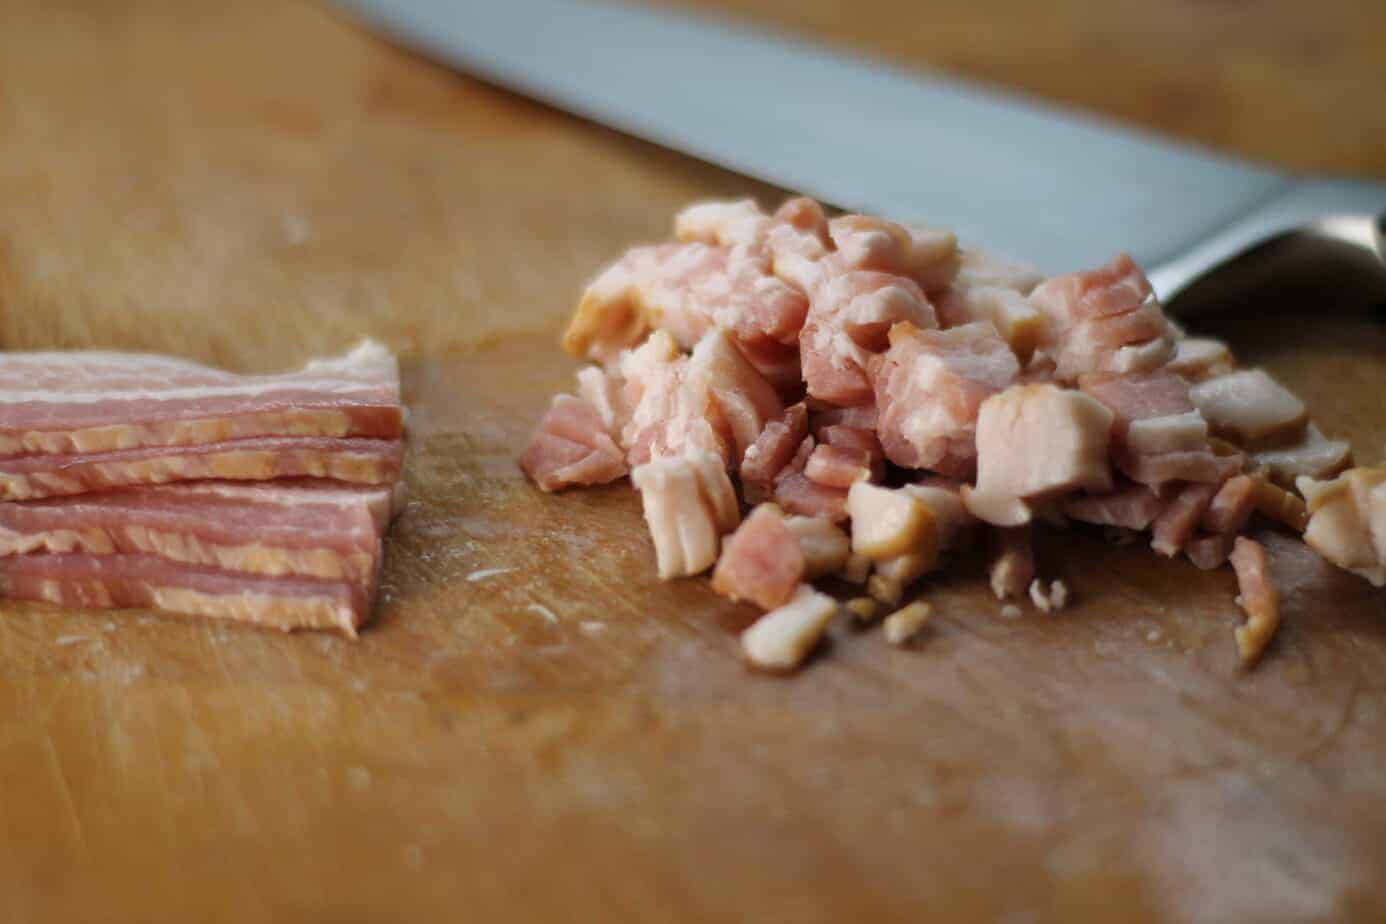 Diced bacon needs to be rendered before being added to this german onion tart